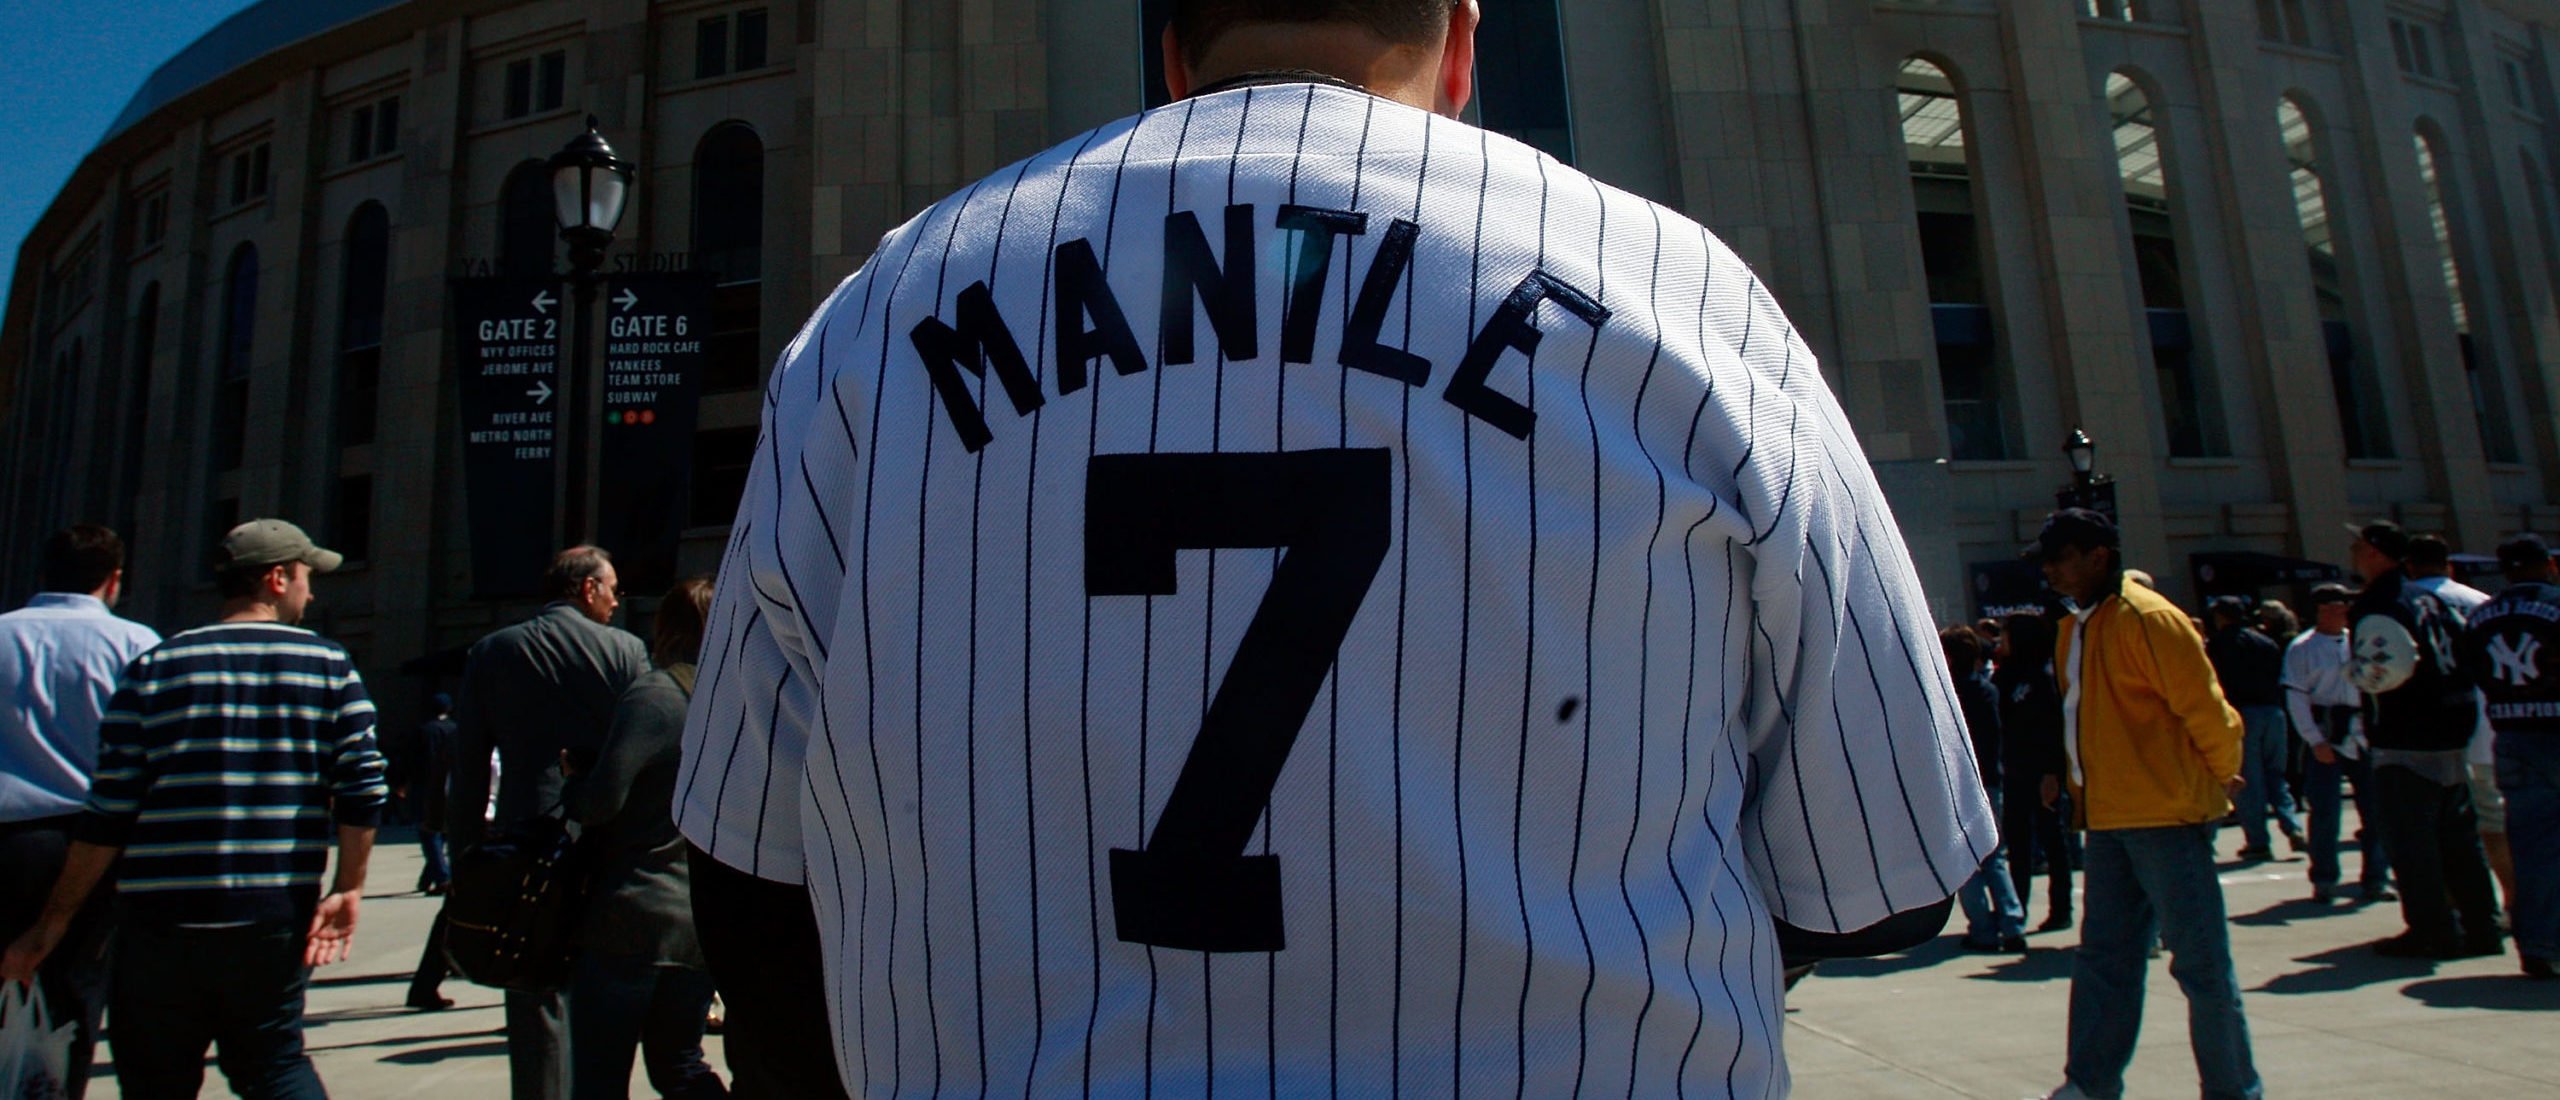 SOLD! A Mickey Mantle Game-worn Yankees Cap Sold for $58,750 - The Hot Bid